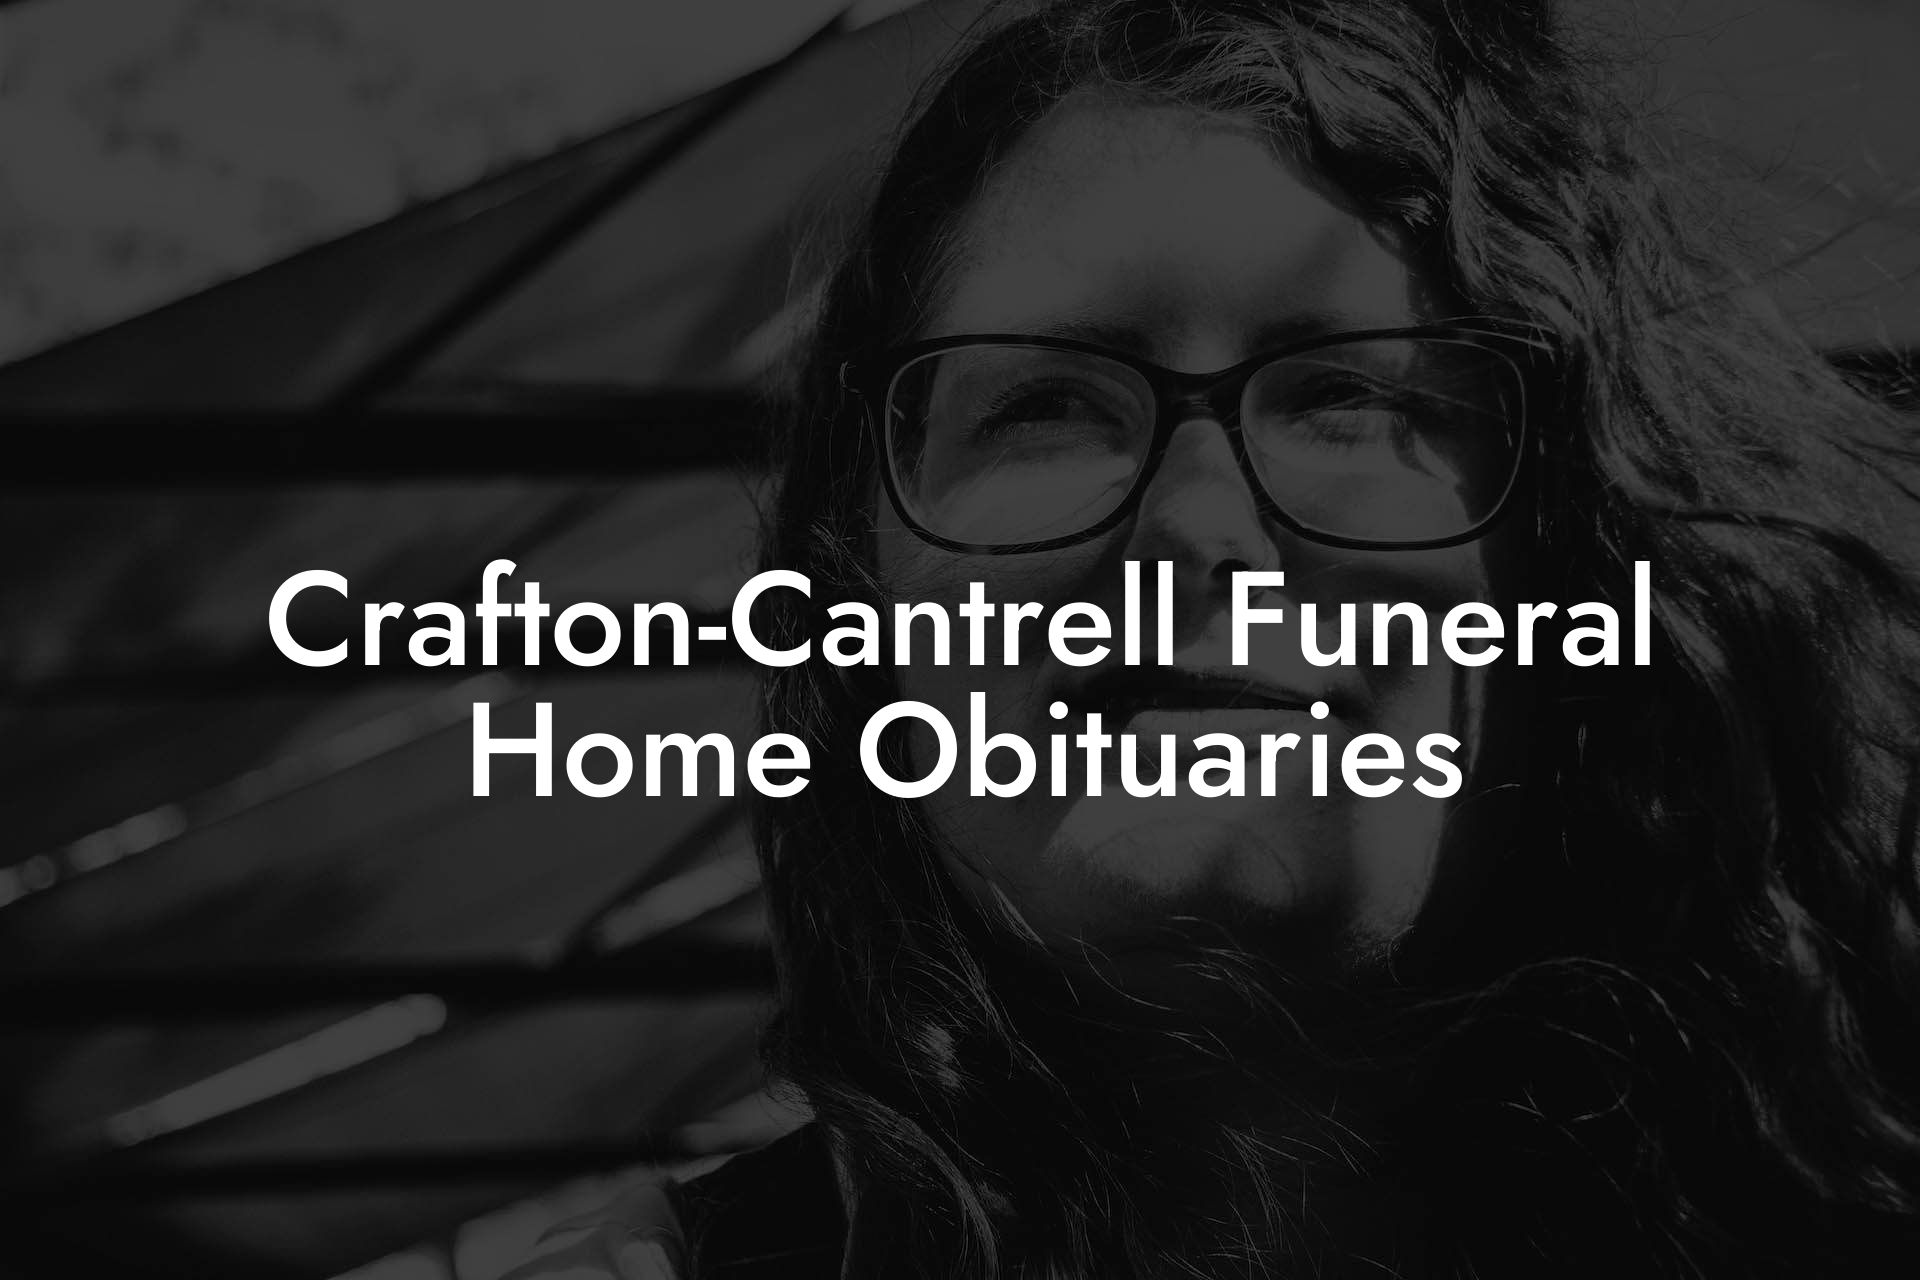 Crafton-Cantrell Funeral Home Obituaries